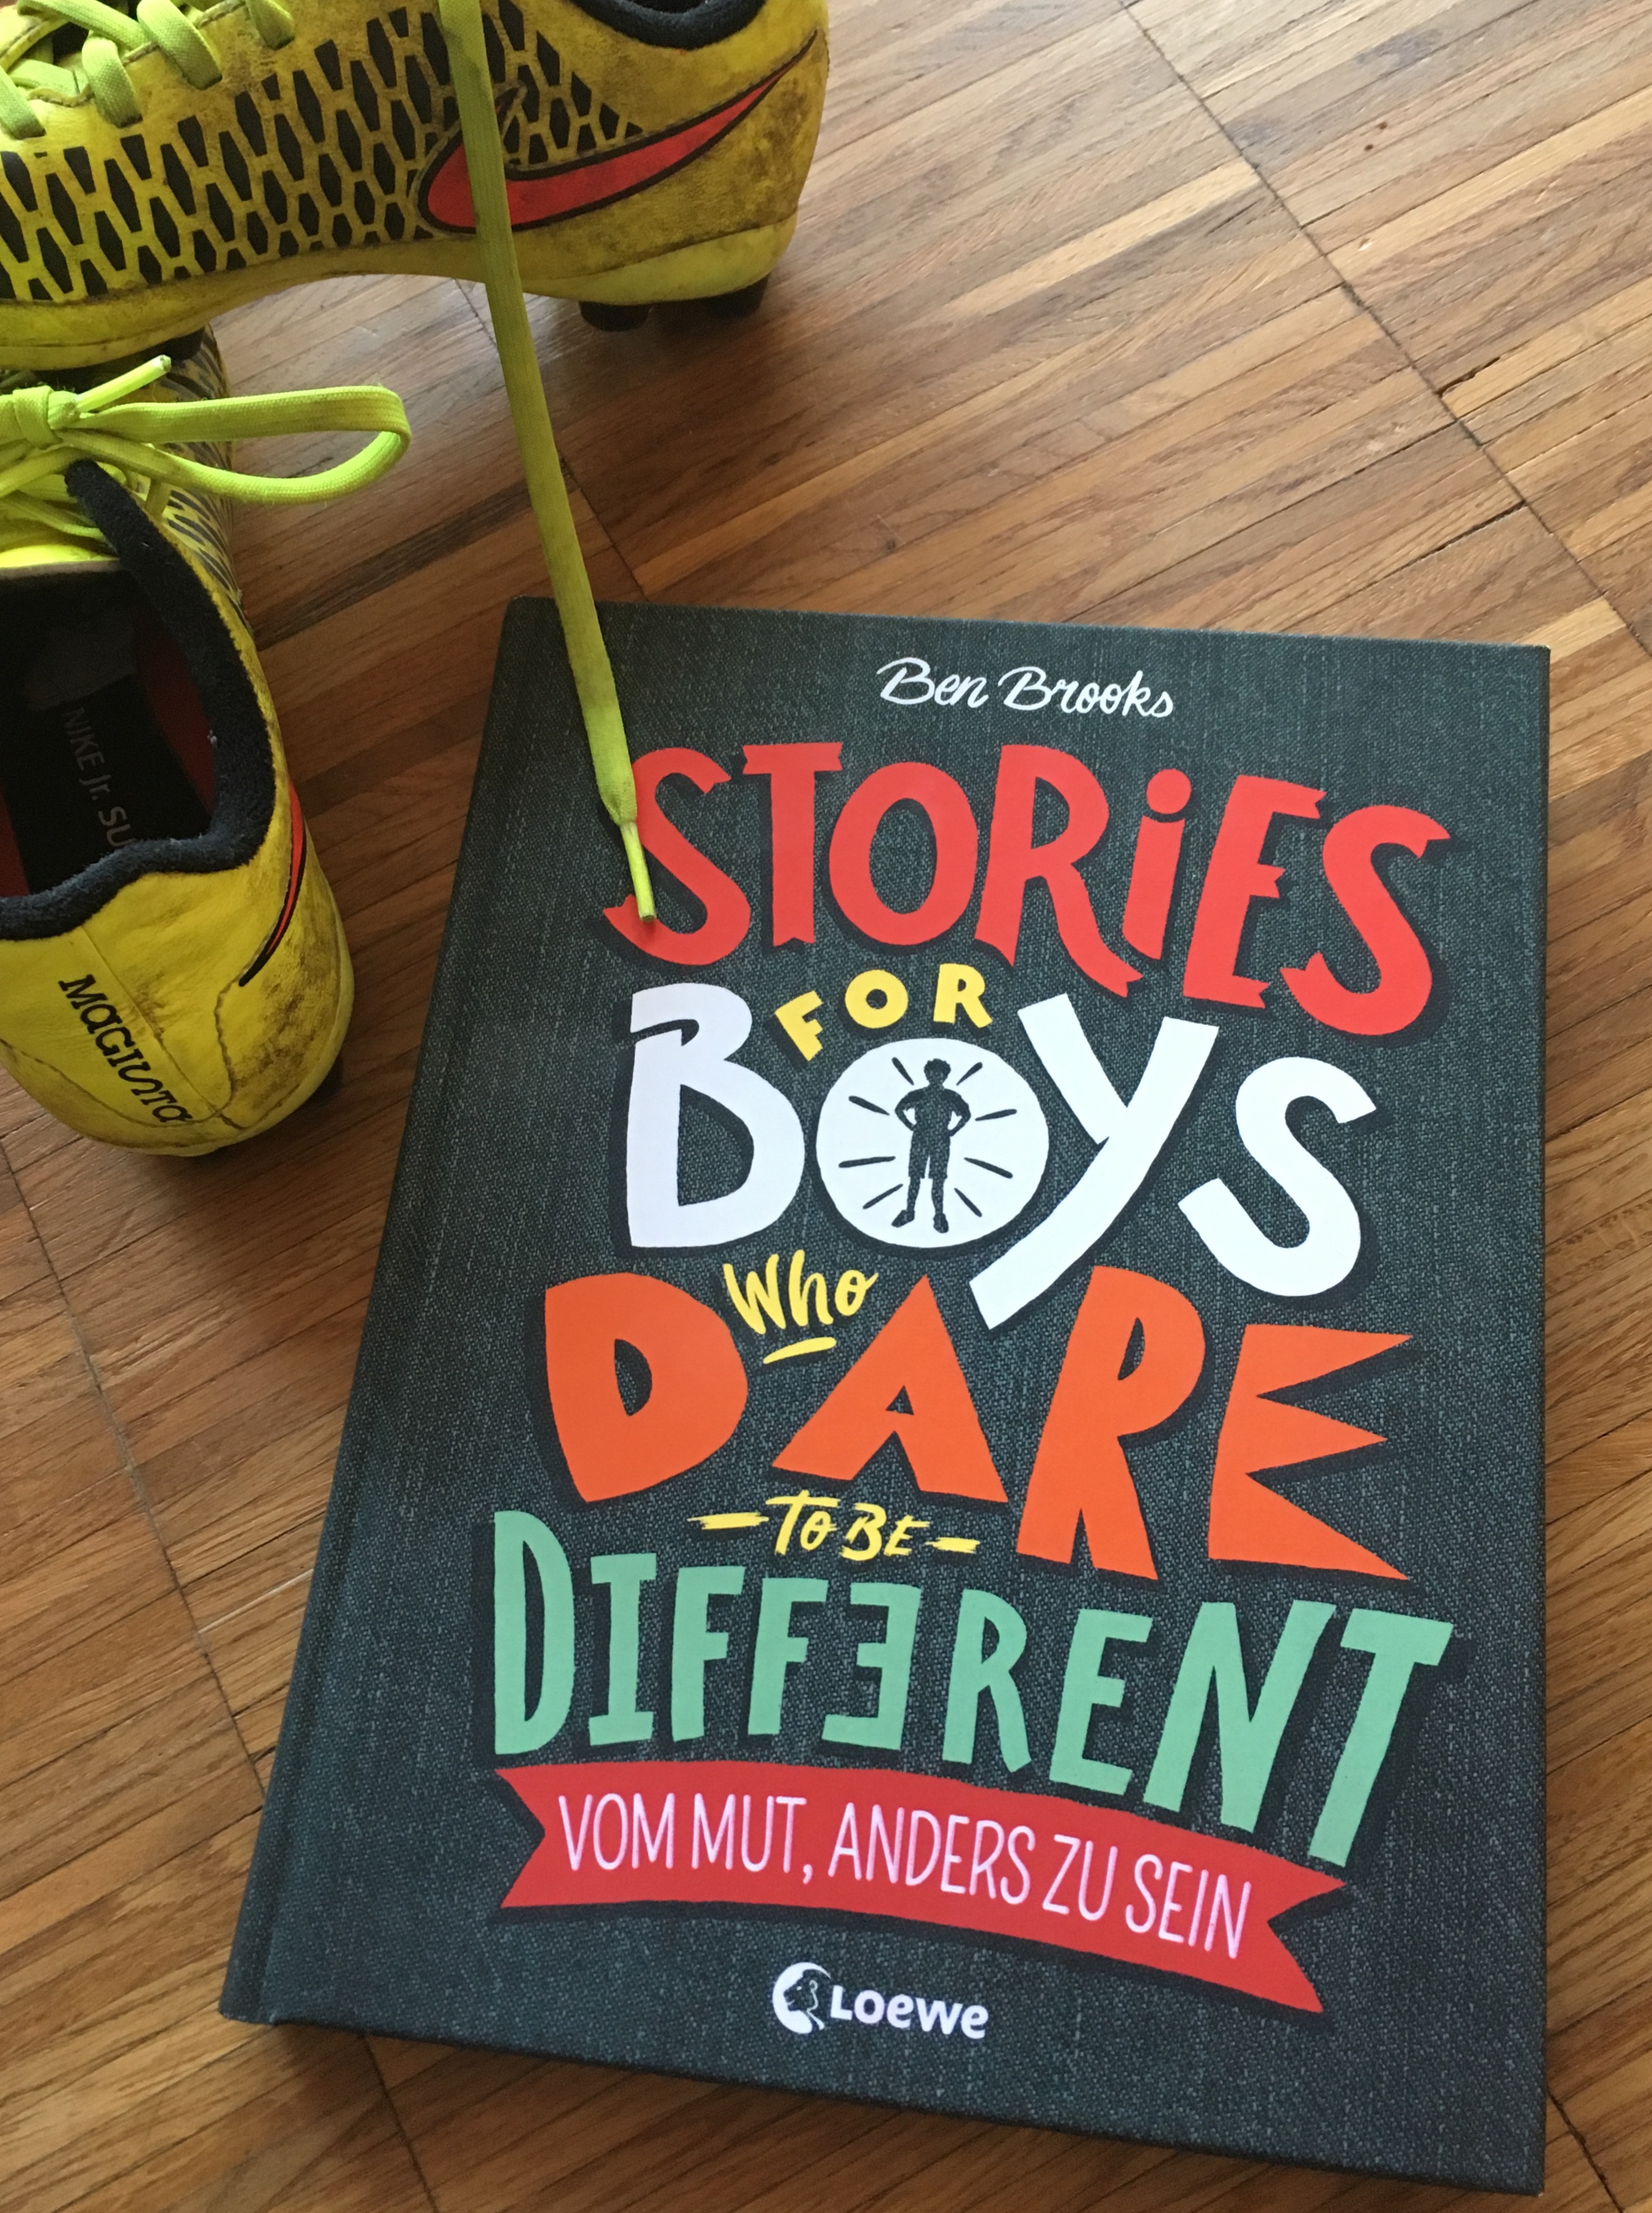 Buchvorstellung: Stories for Boys who dare to be different – Vom Mut anders zu sein